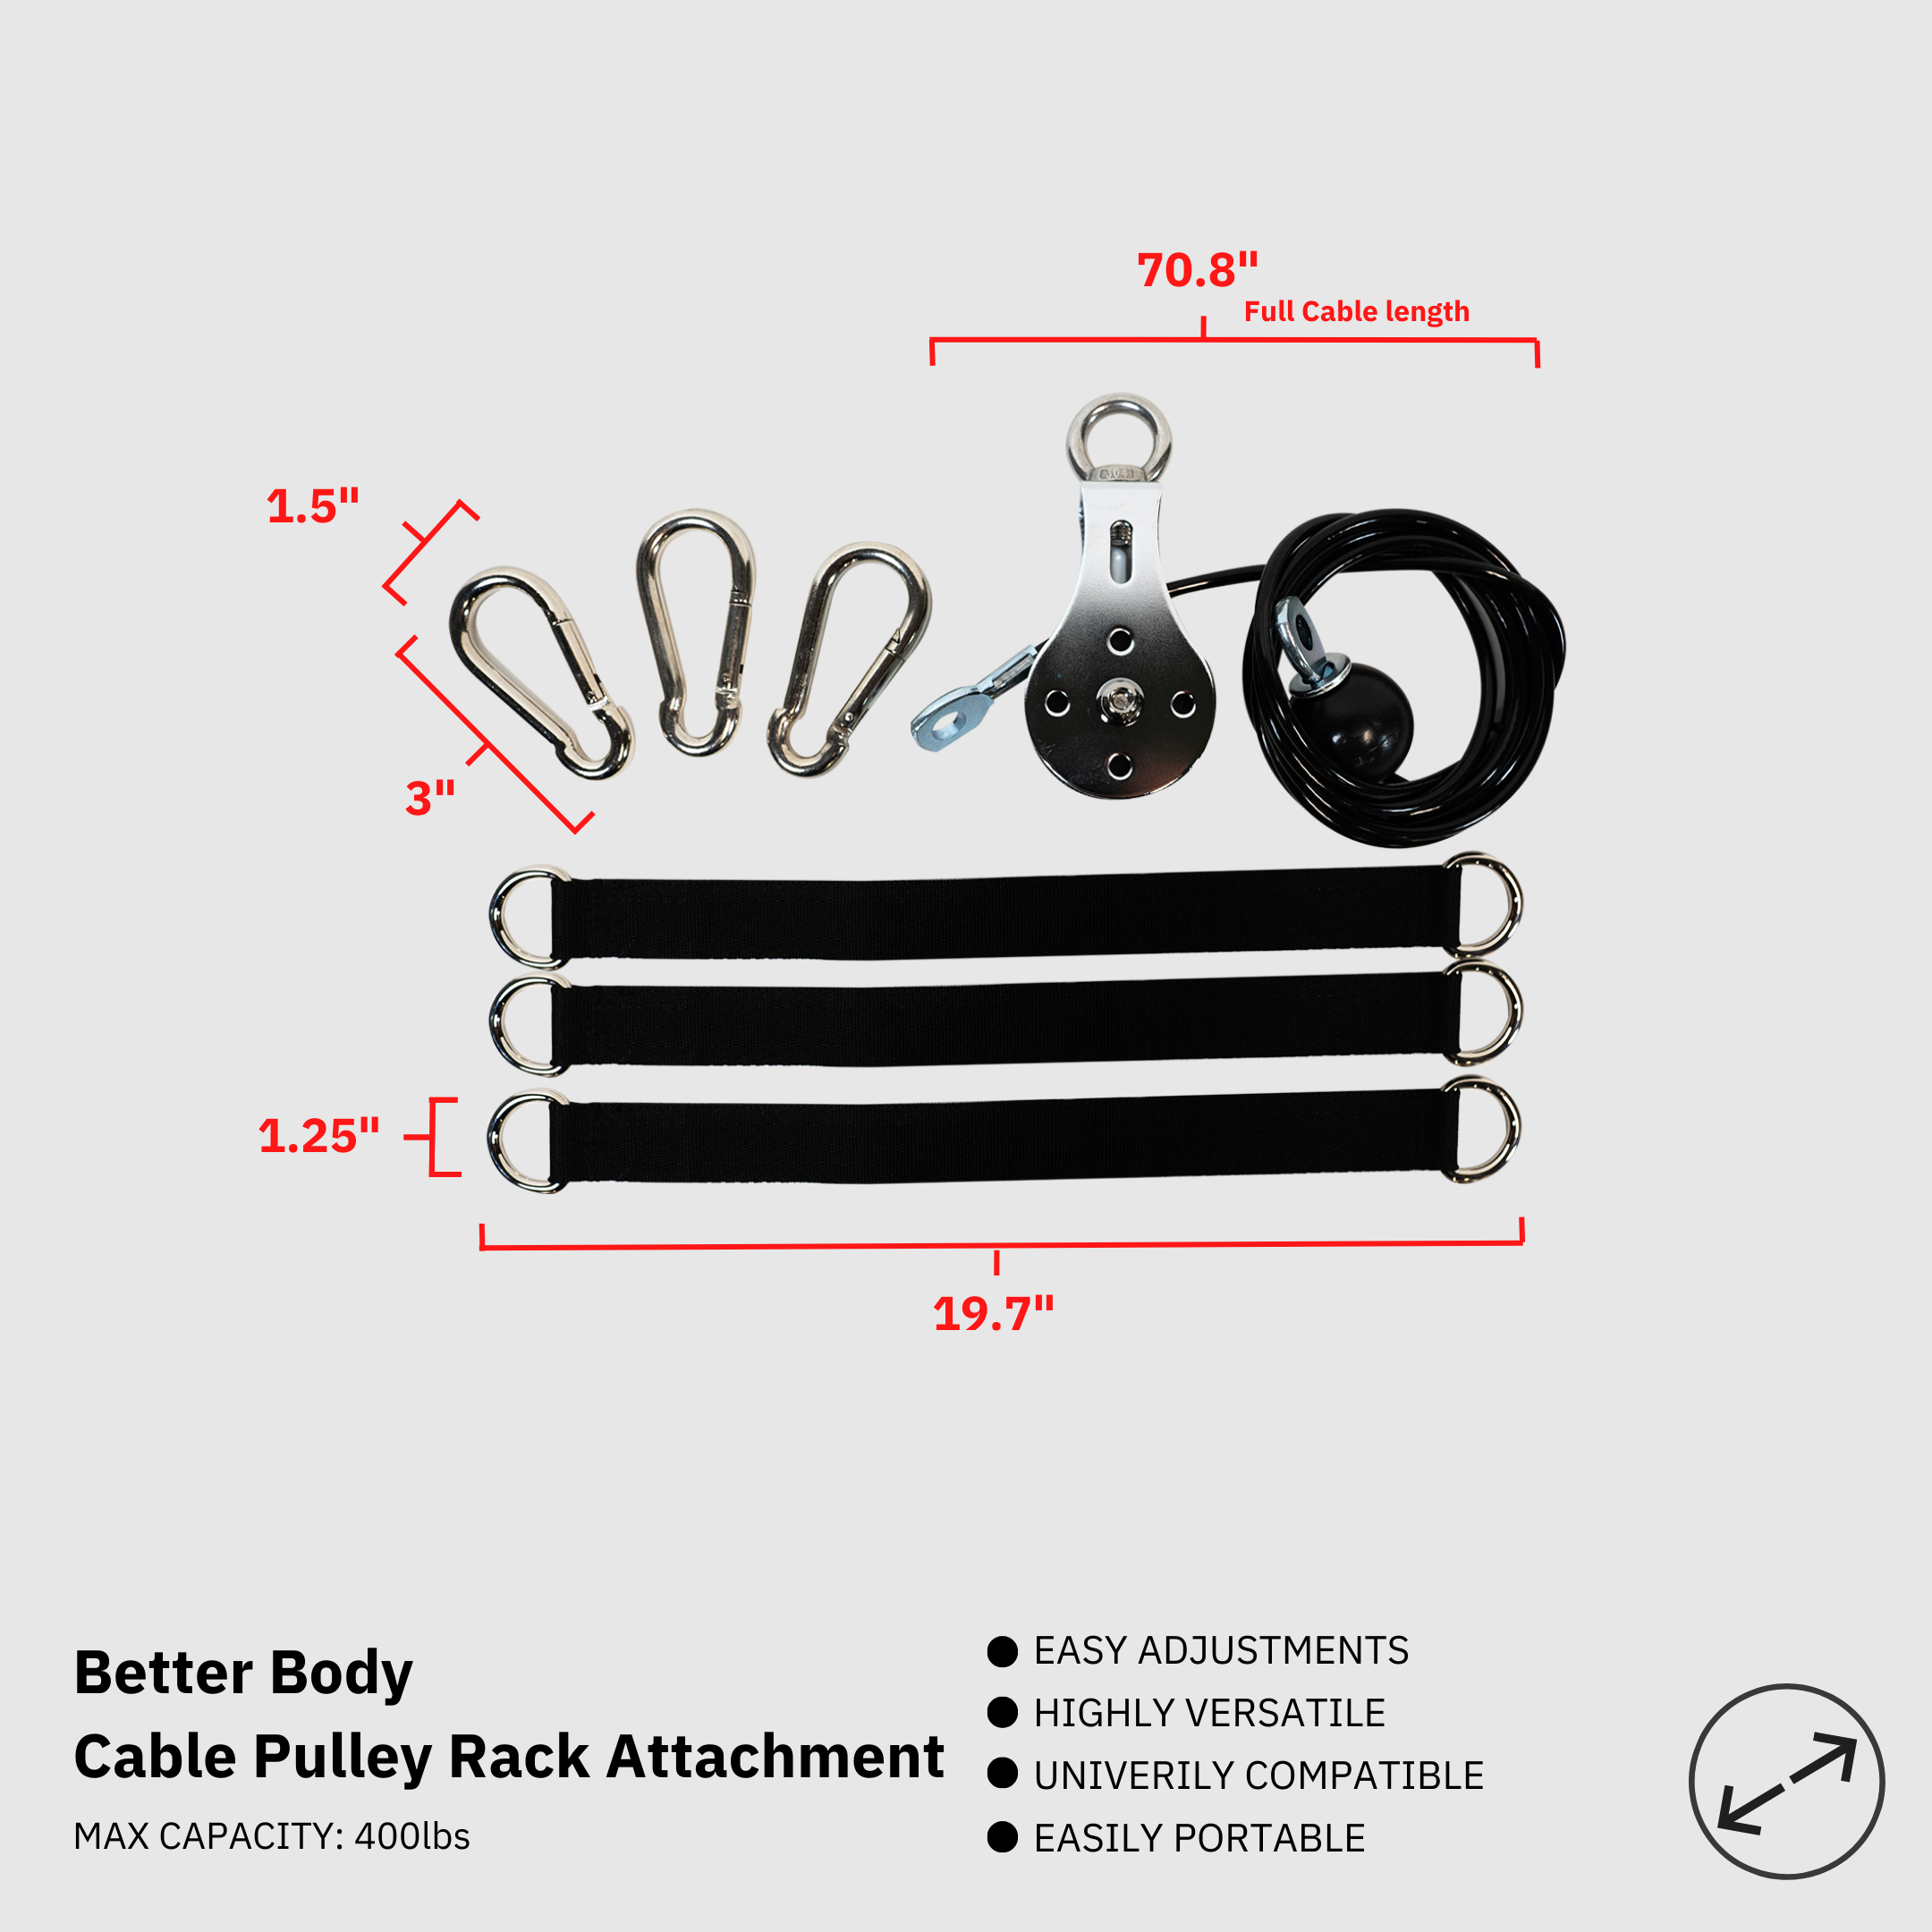 Better Body Cable Pulley | Rack Attachment Footprint